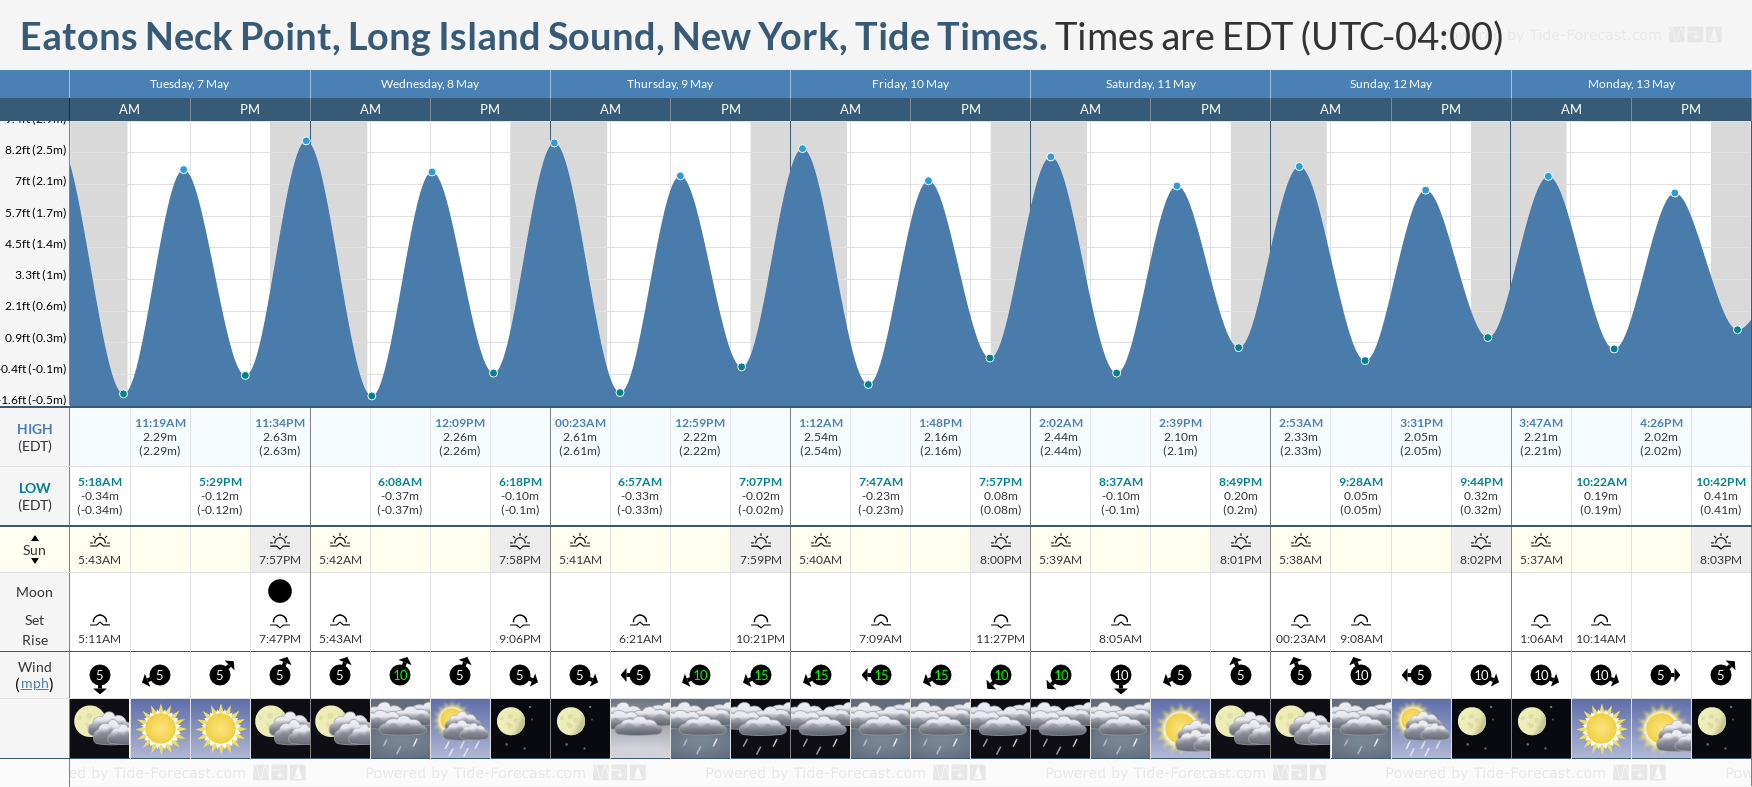 Eatons Neck Point, Long Island Sound, New York Tide Chart including high and low tide times for the next 7 days